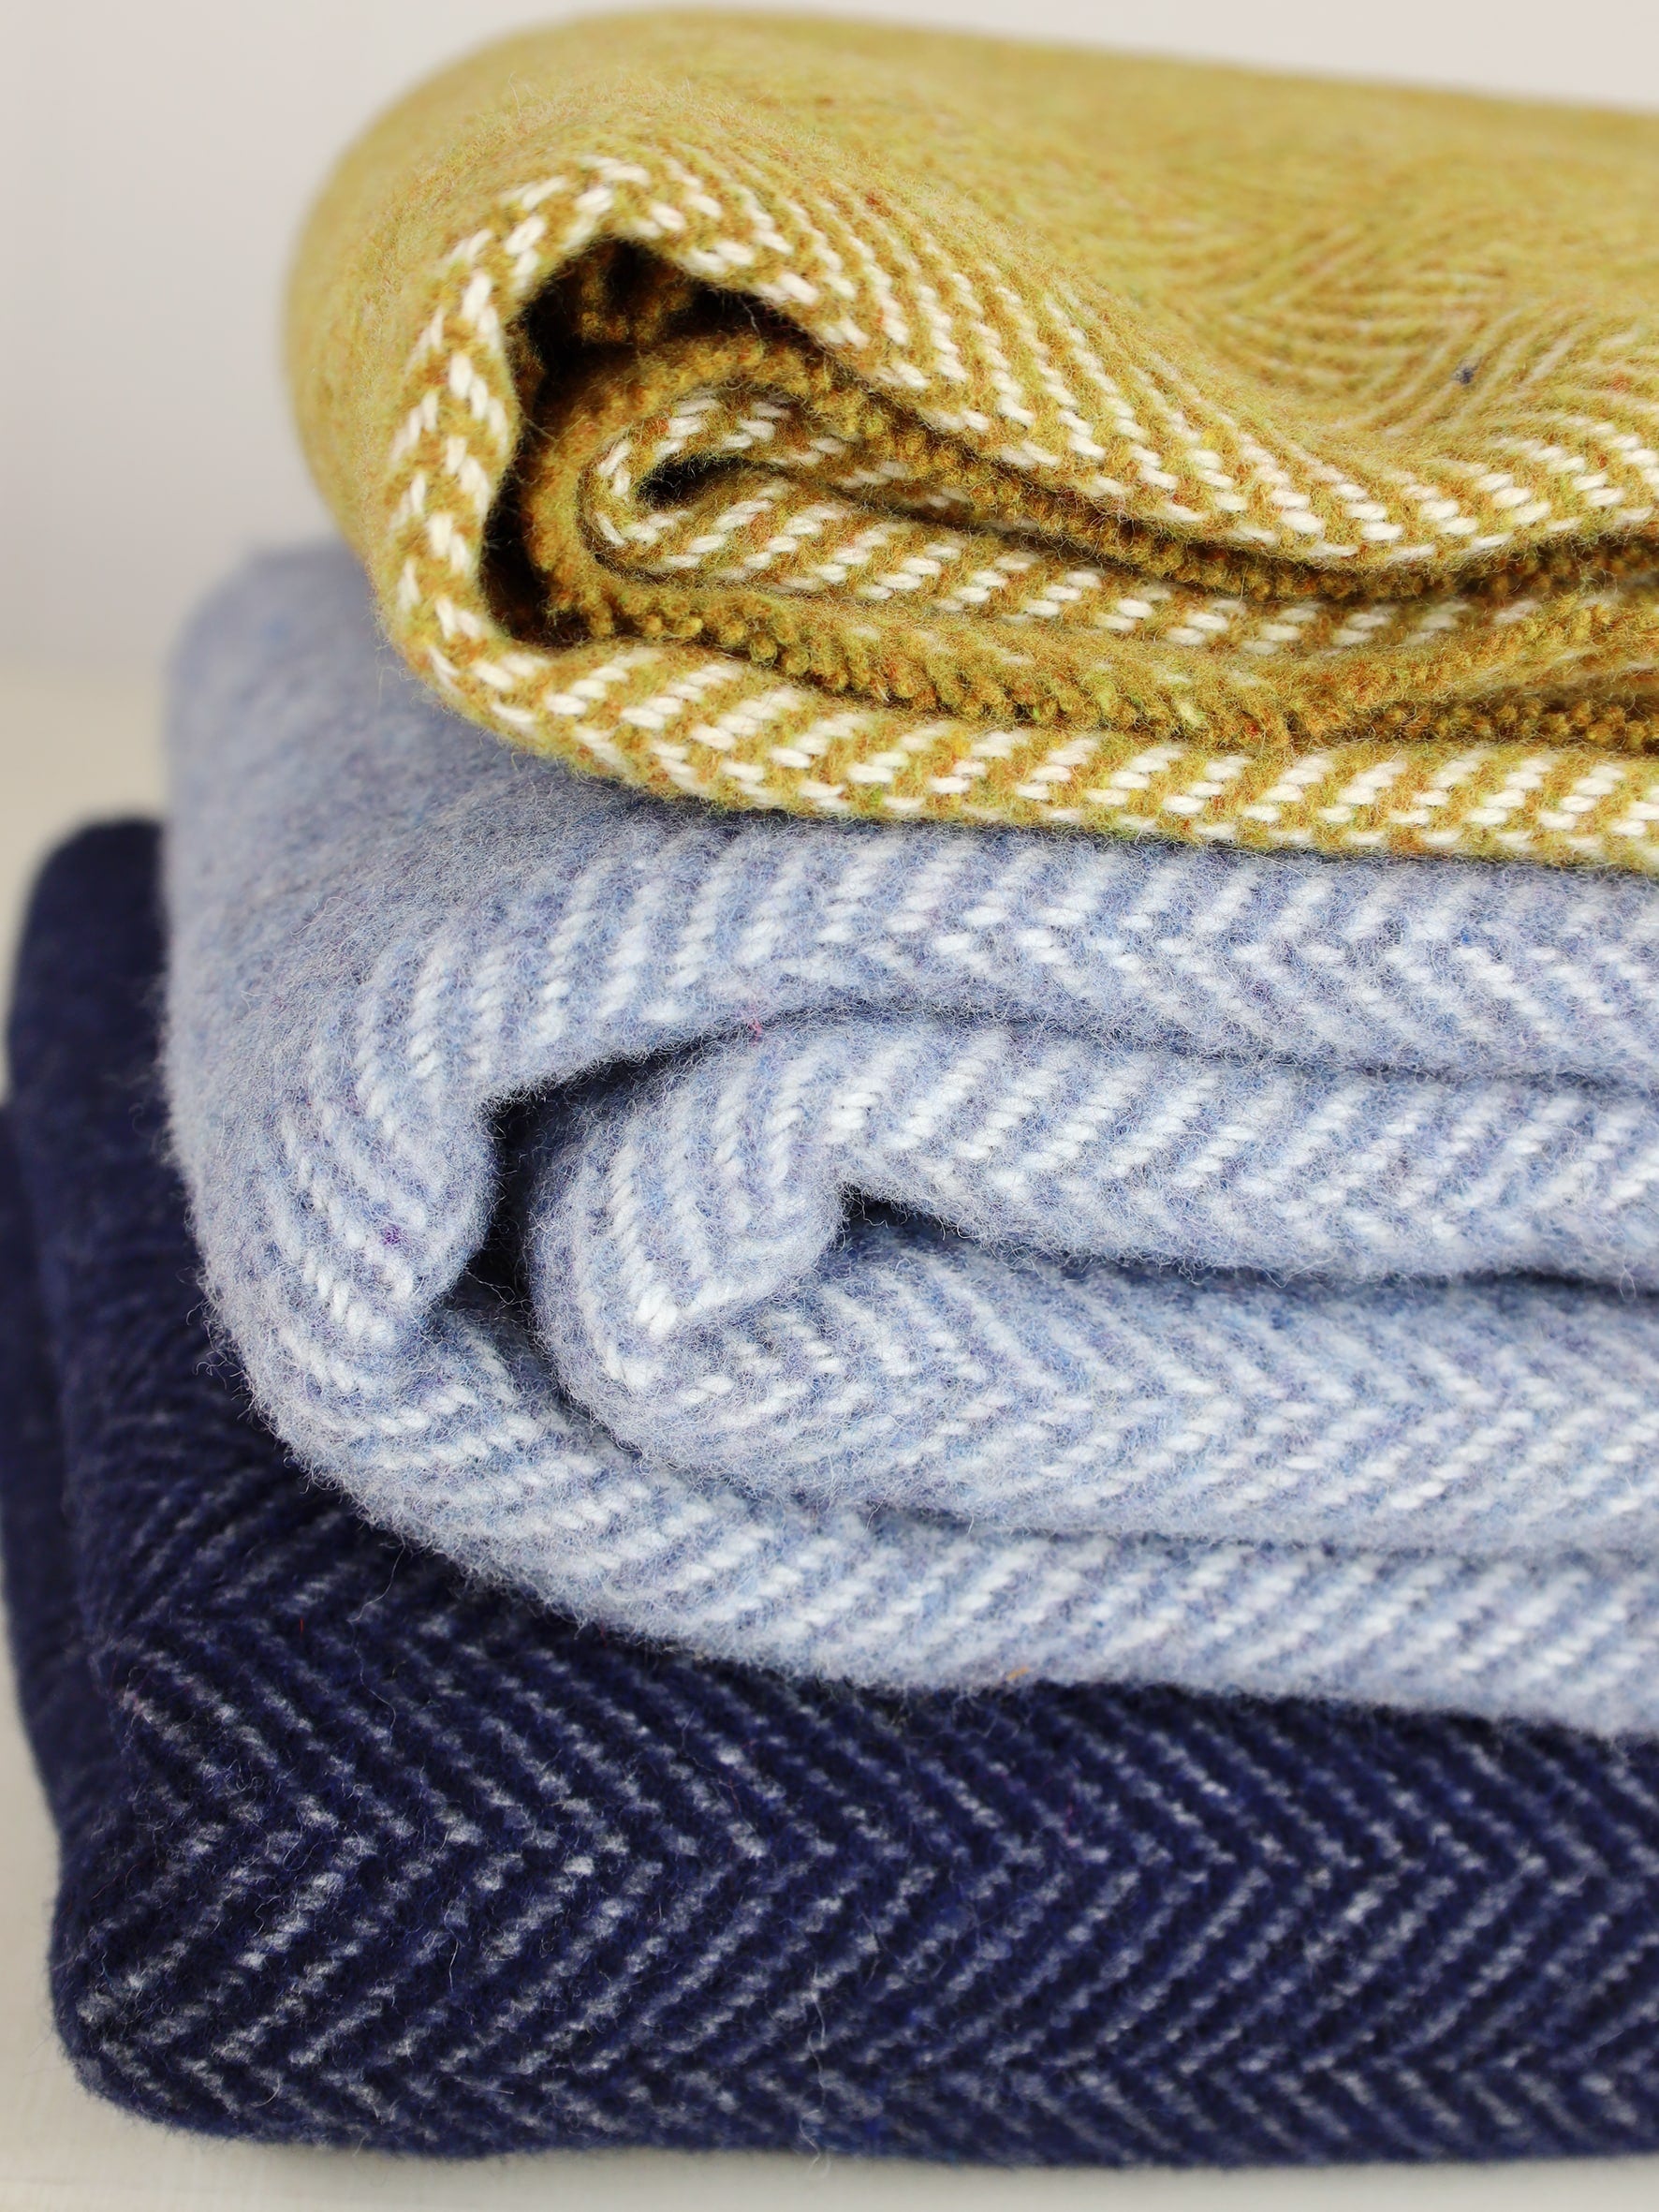 Cashmere Throw Dark Navy Herringbone at the bottom of a pile of three cashmere throws,Navy,Baby blue and Mustard.